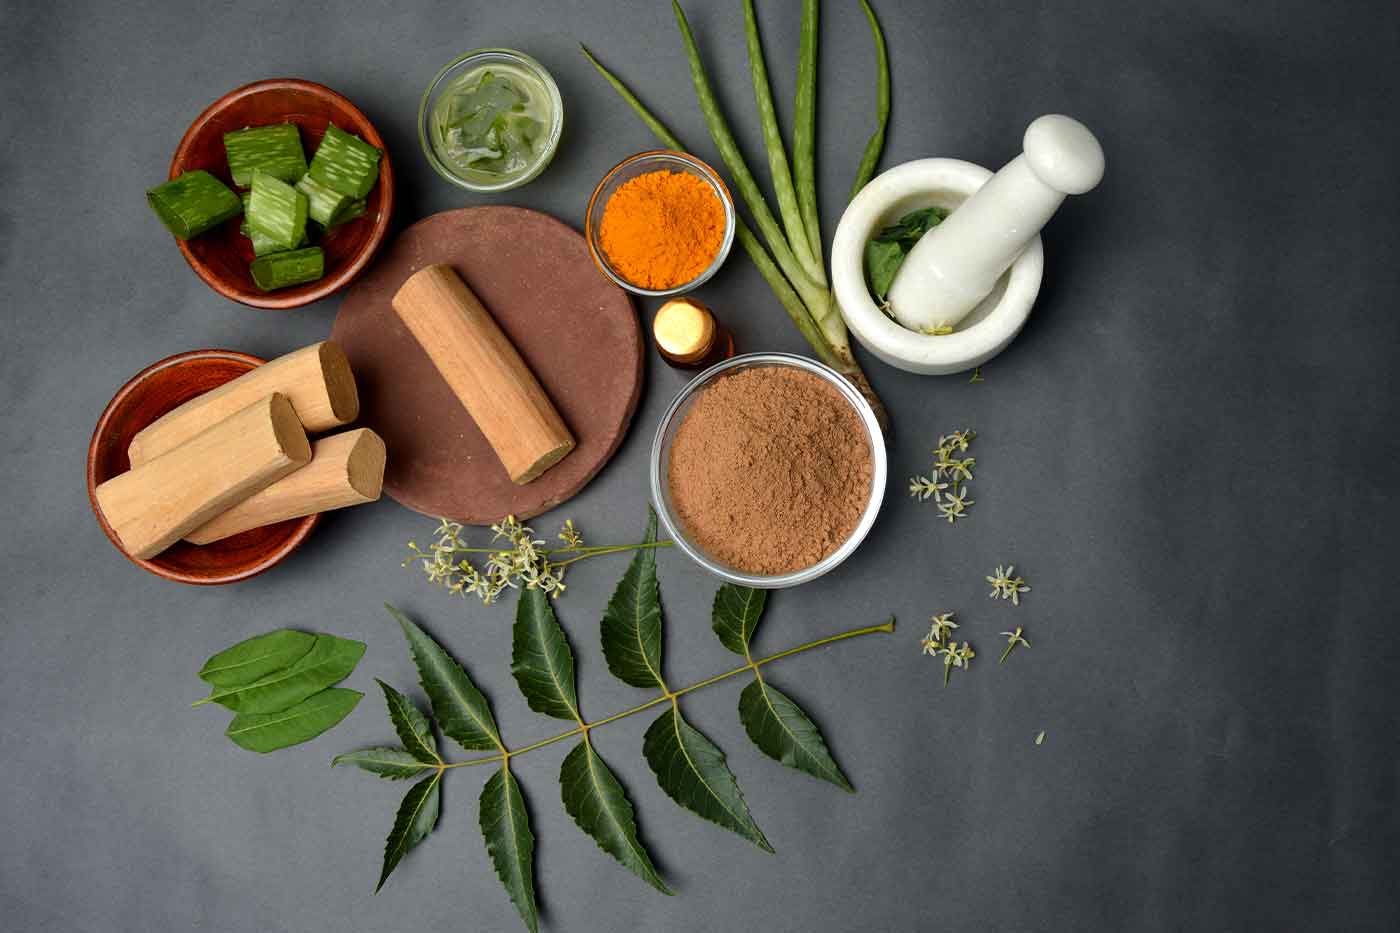 Research reveal 20% consumers still believe Ayurvedic treatments as old fashioned